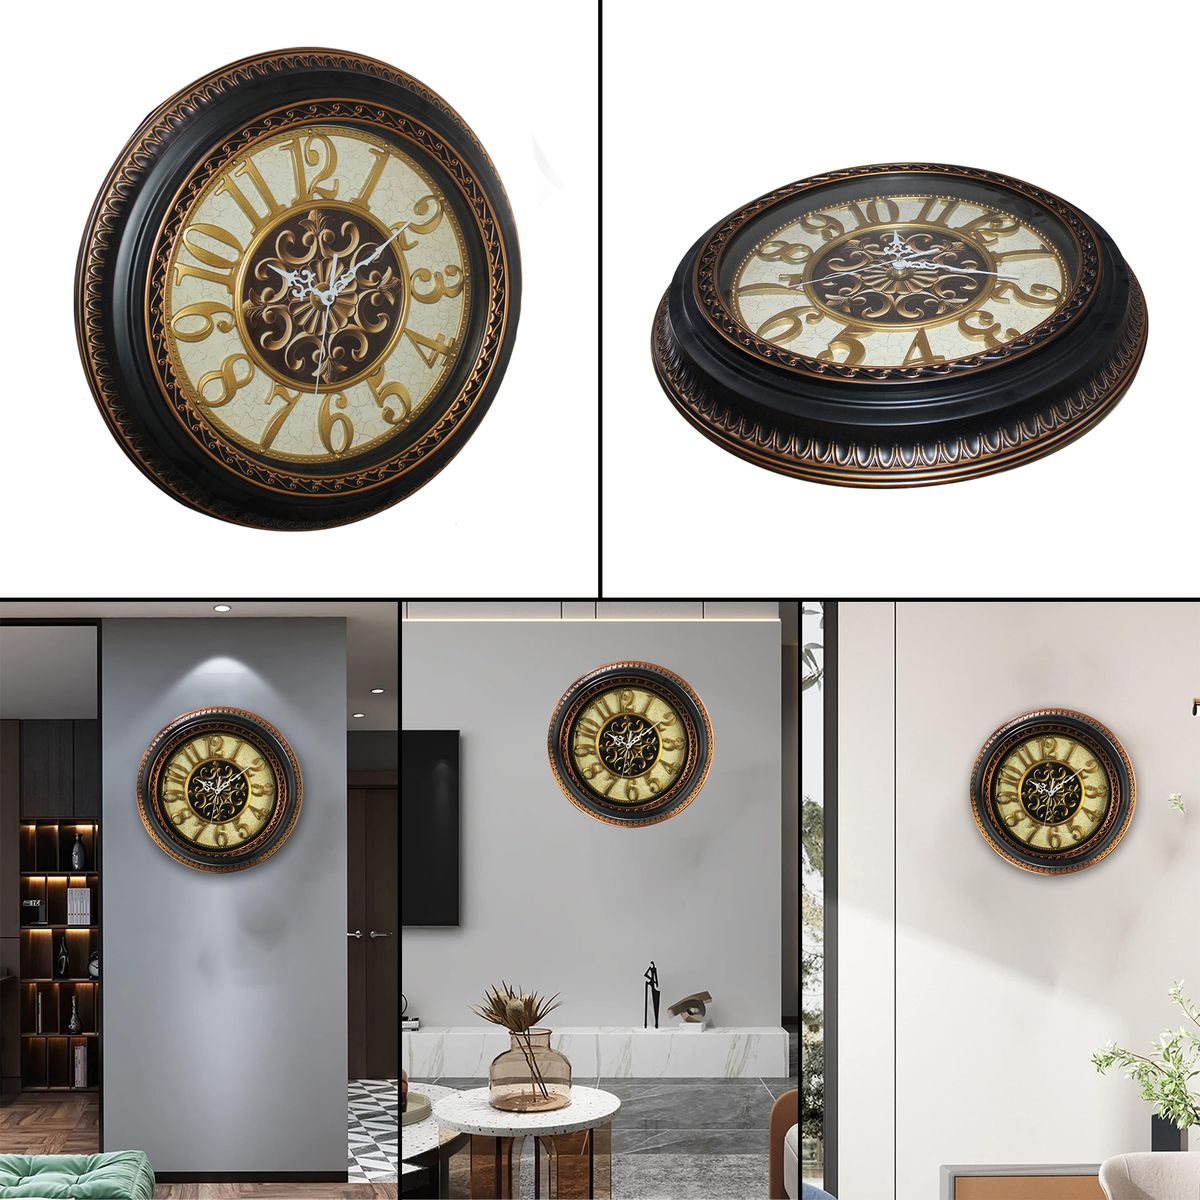 Ornate Border Round Wall Clock with Anrique Motif - 006